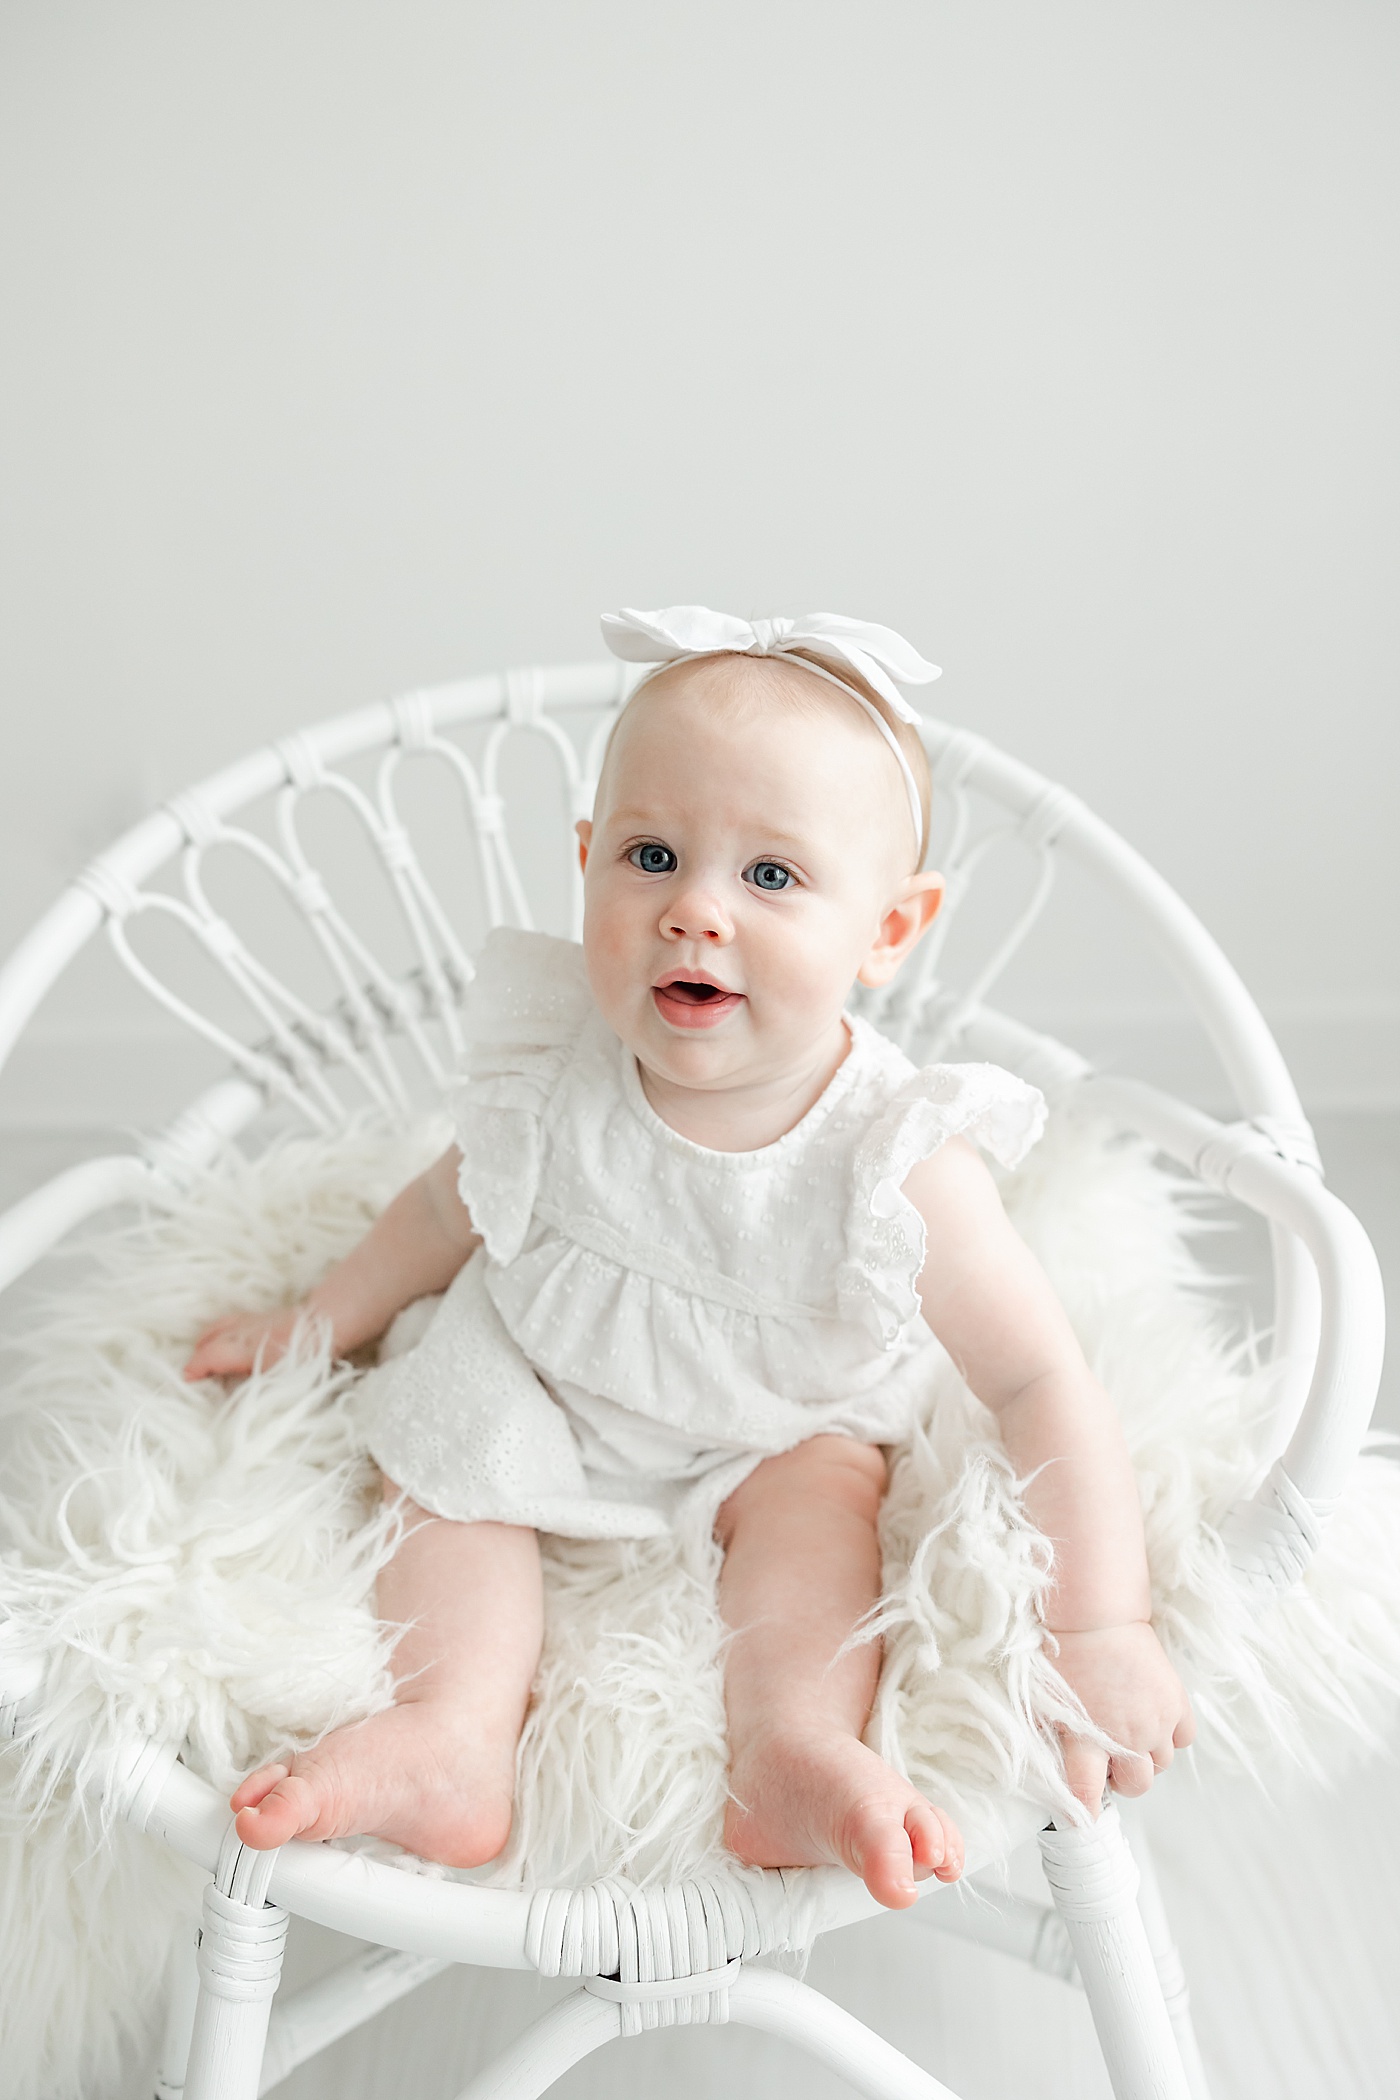 7 month old in studio for photoshoot with Kristin Wood Photography.